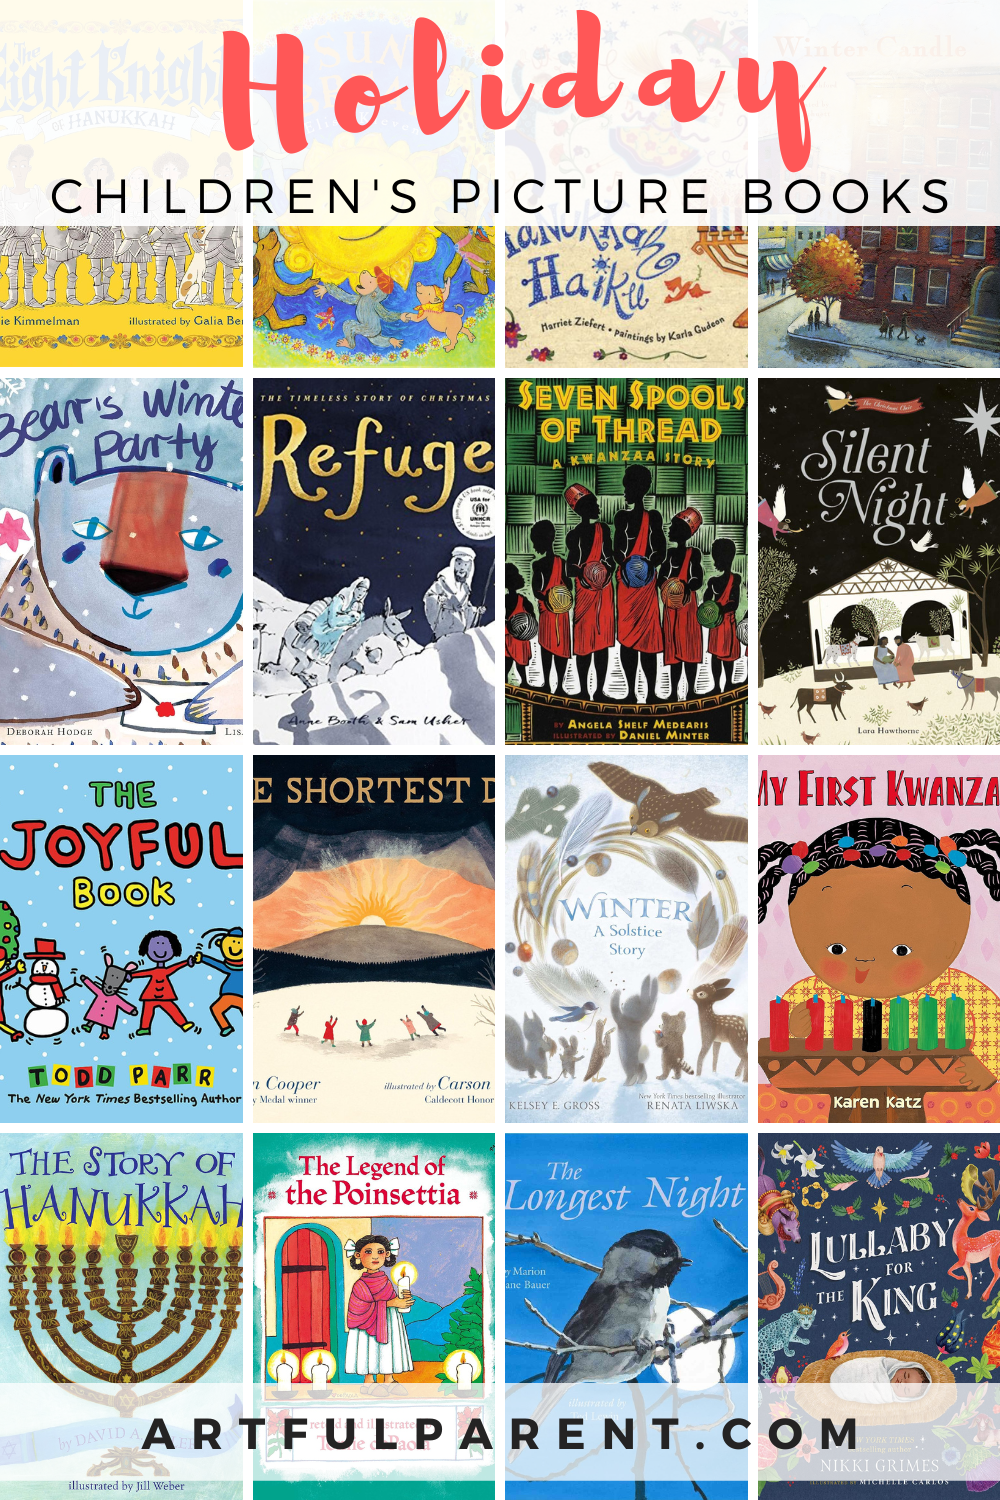 The Best Holiday Picture Books